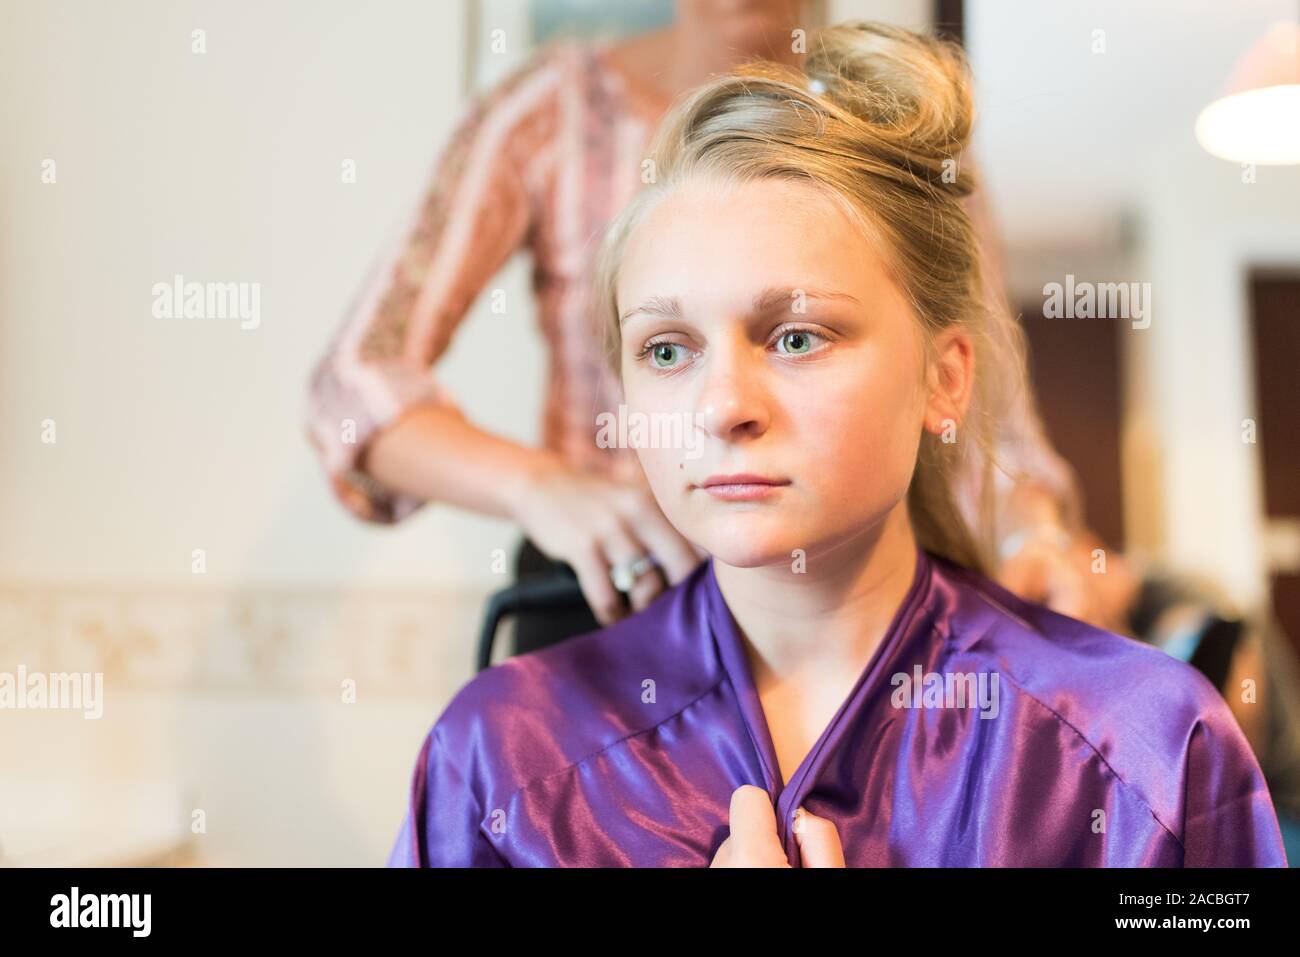 A pretty bridesmaid getting ready for the wedding day ahead, having her hair and makeup done, bridal preparation, bridal prep Stock Photo